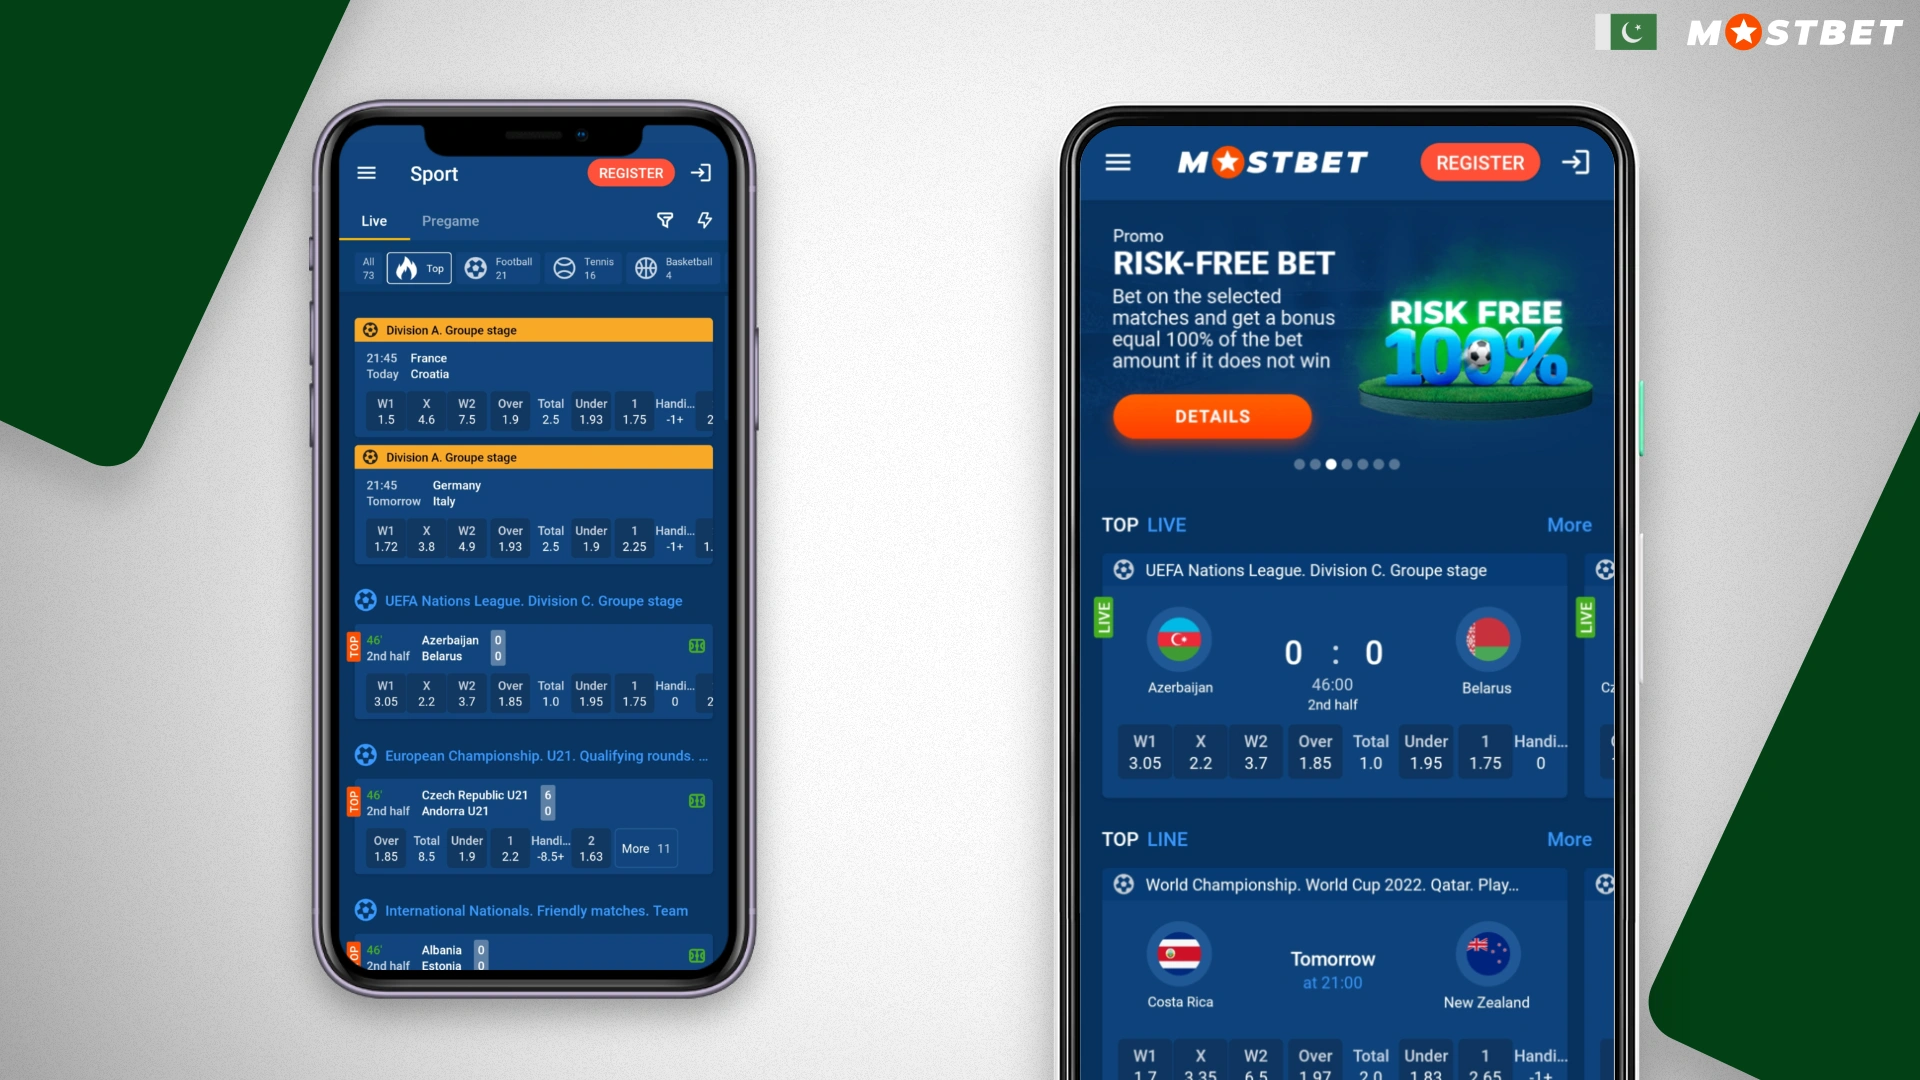 Free Mostbet mobile app for Android and iOS